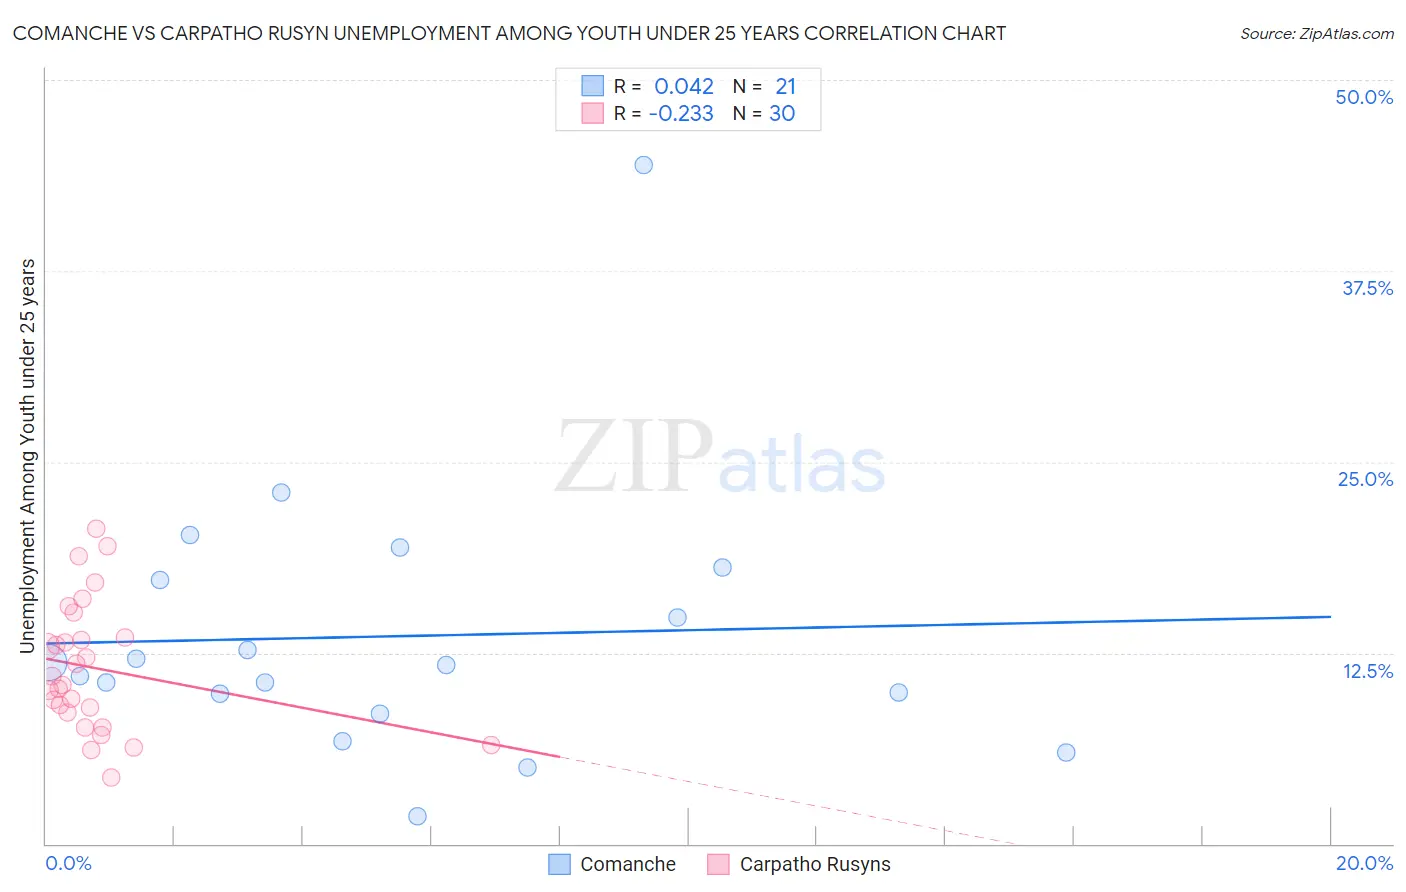 Comanche vs Carpatho Rusyn Unemployment Among Youth under 25 years